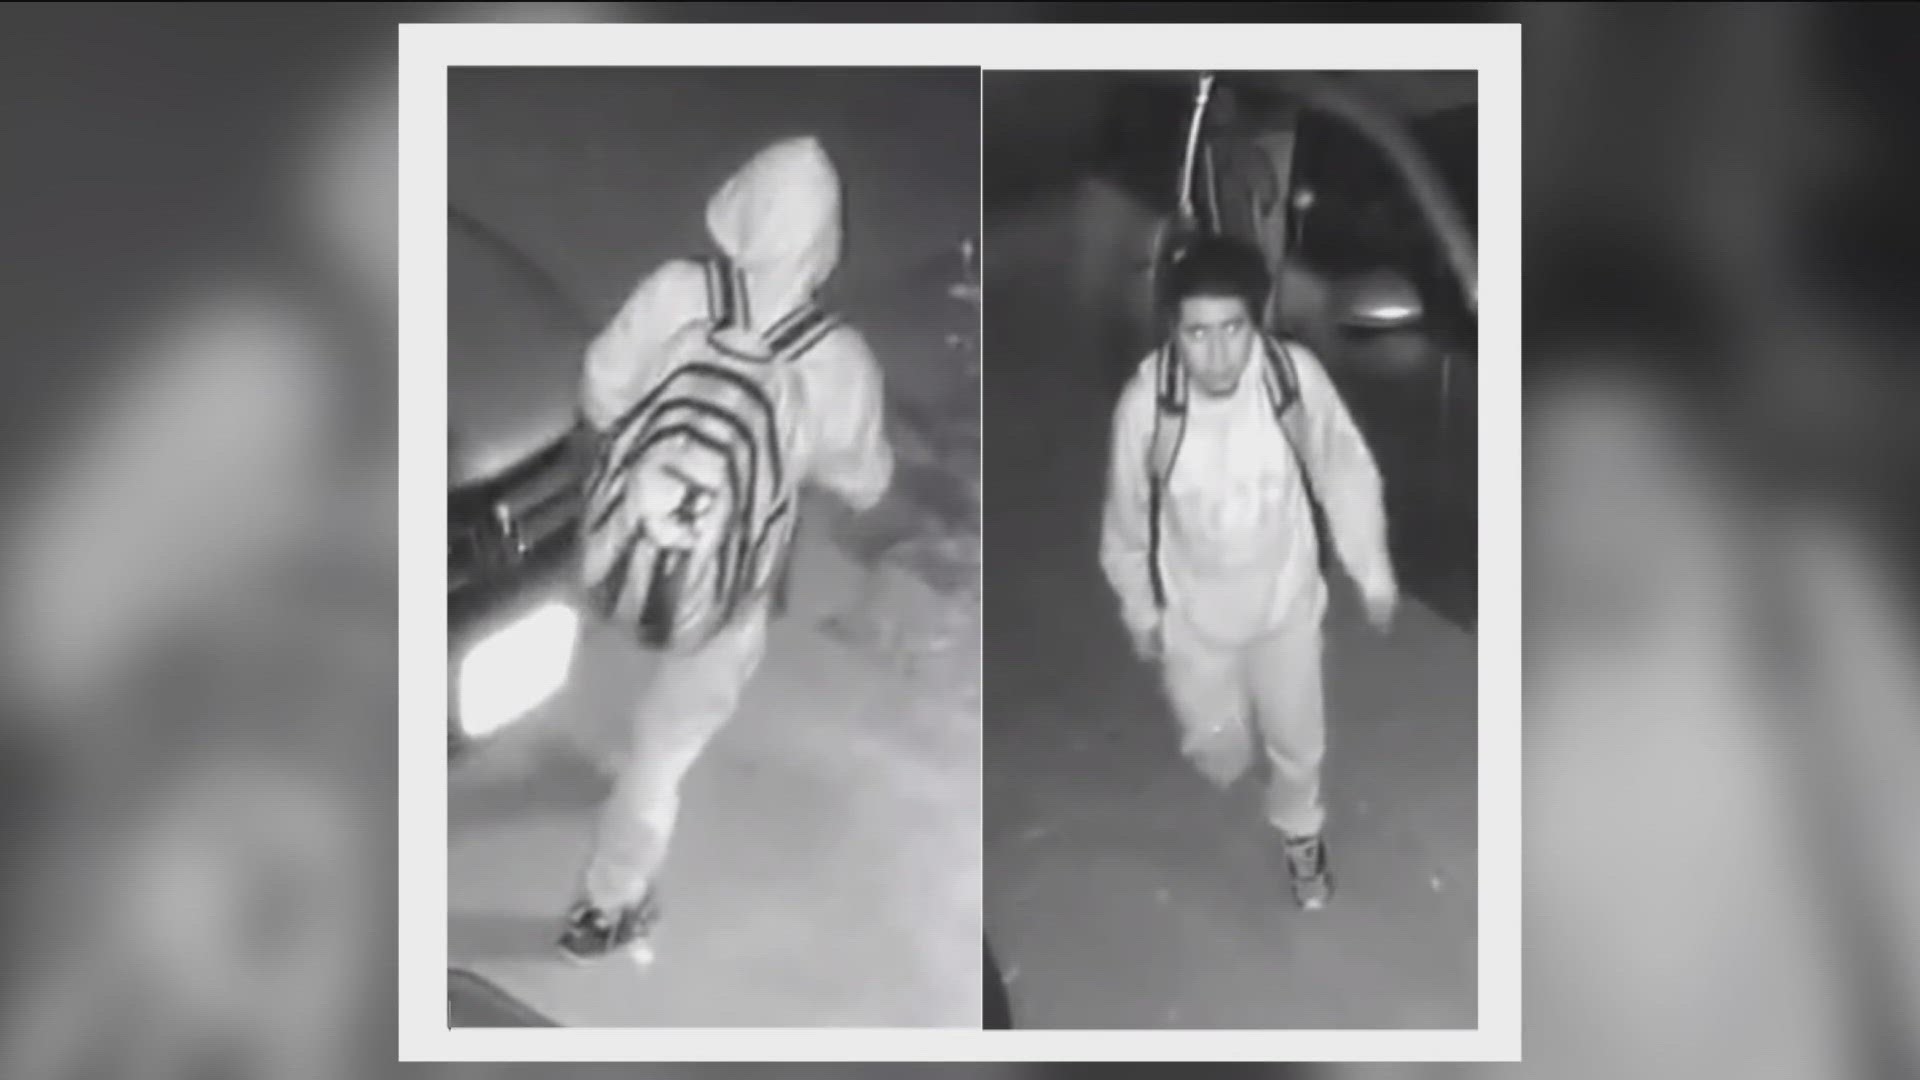 Hours after 22-year-old Alejandro Jose Confesor was caught on camera returning to the Linda Vista home where the alleged assault happened, he was in custody.